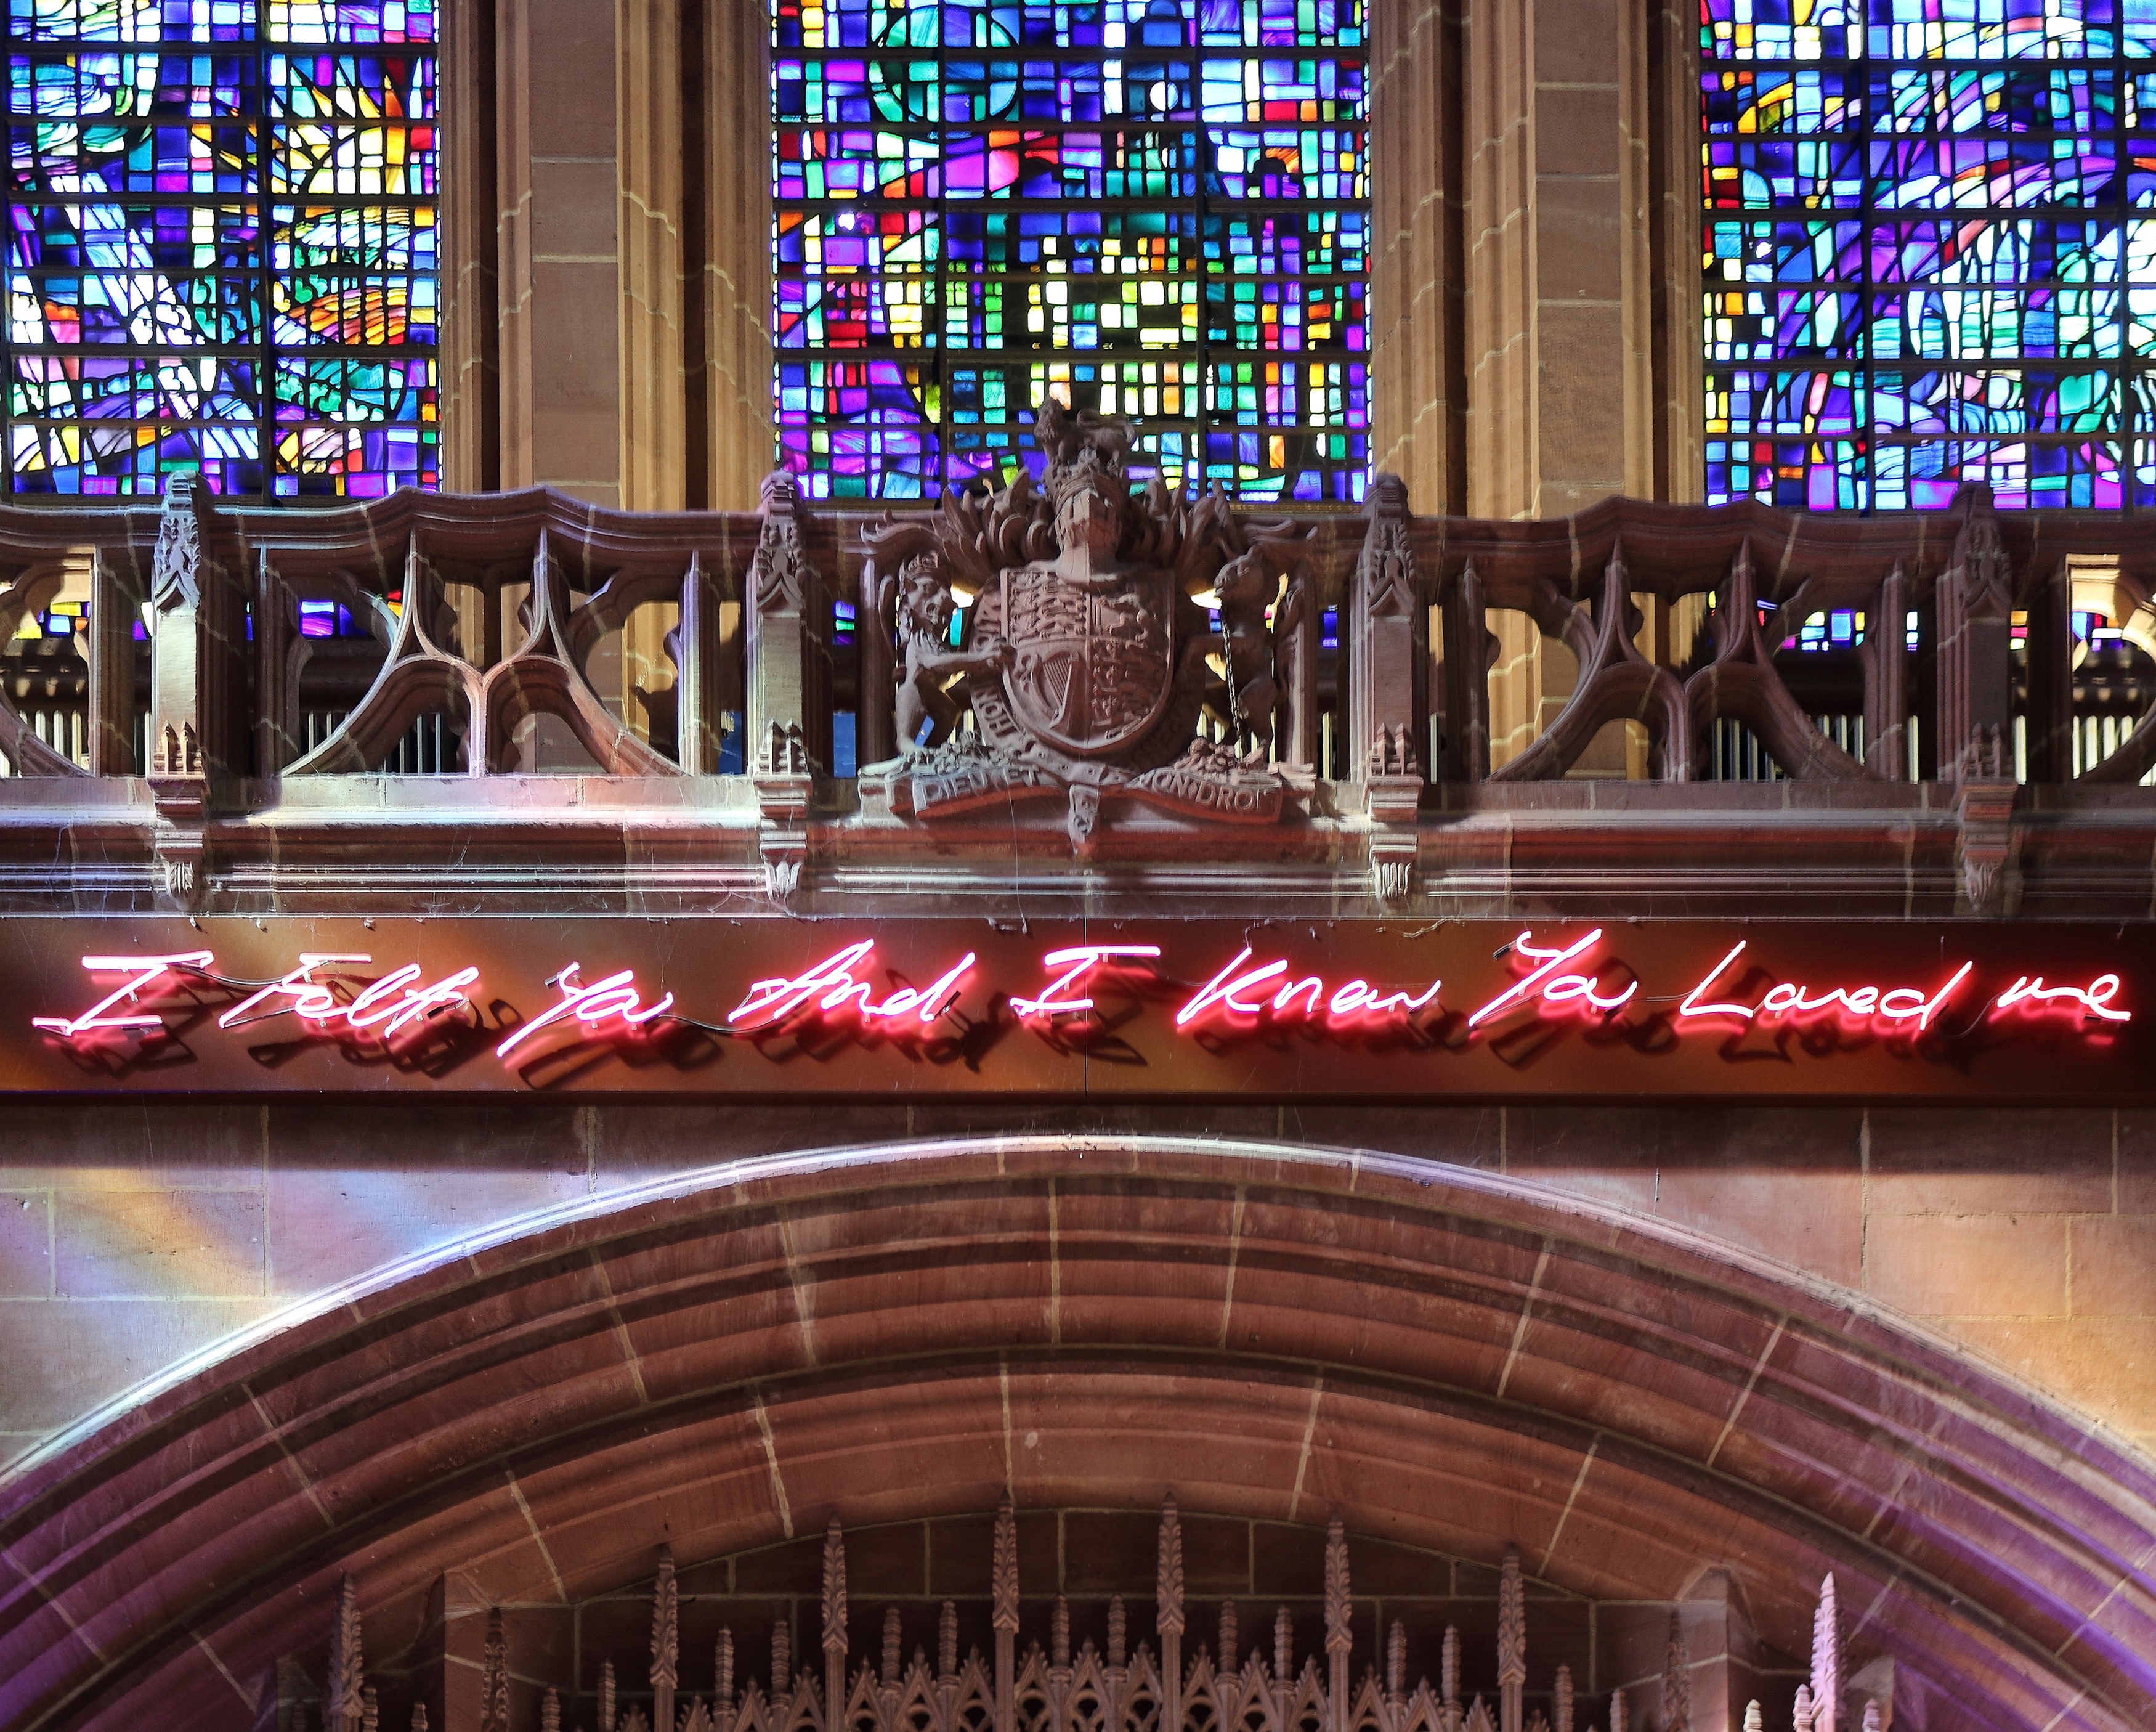 Tracey Emin and The Dean and Chapter of Liverpool Cathedral  By Phil Nash from Wikimedia Commons CC BY-SA 4.0, CC BY-SA 4.0 <https://creativecommons.org/licenses/by-sa/4.0>, via Wikimedia Commons